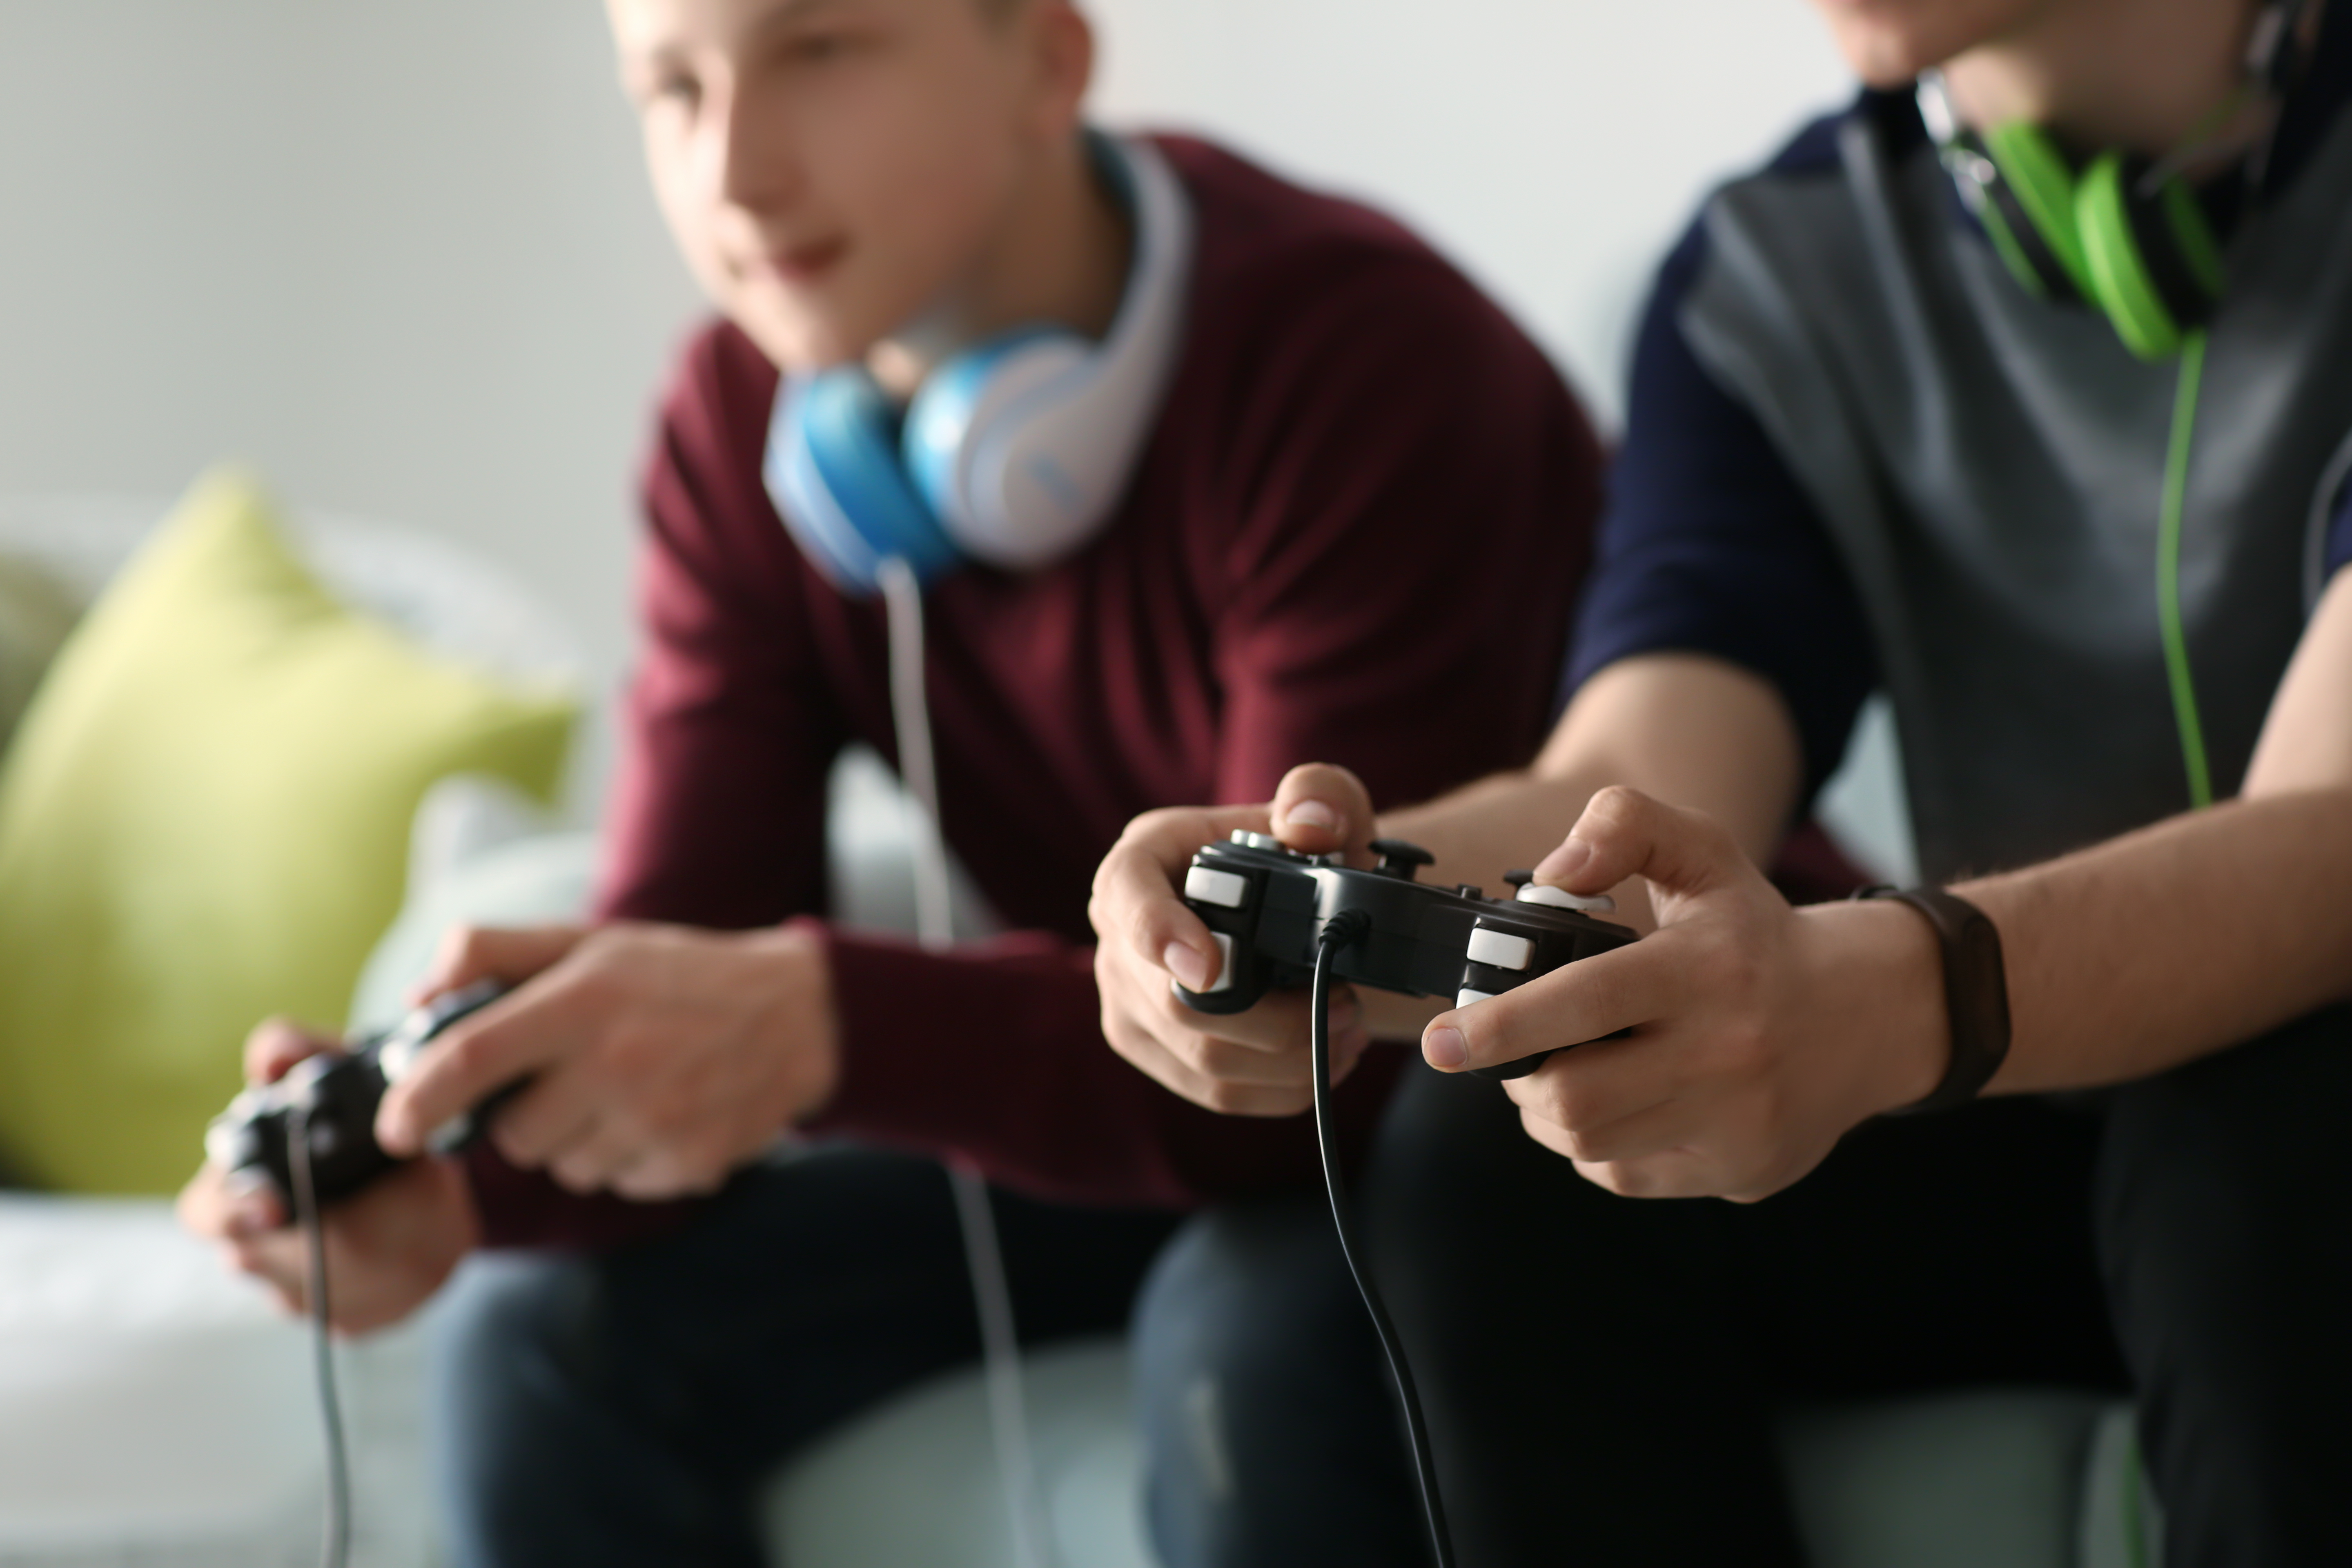 Boys playing games | Shutterstock